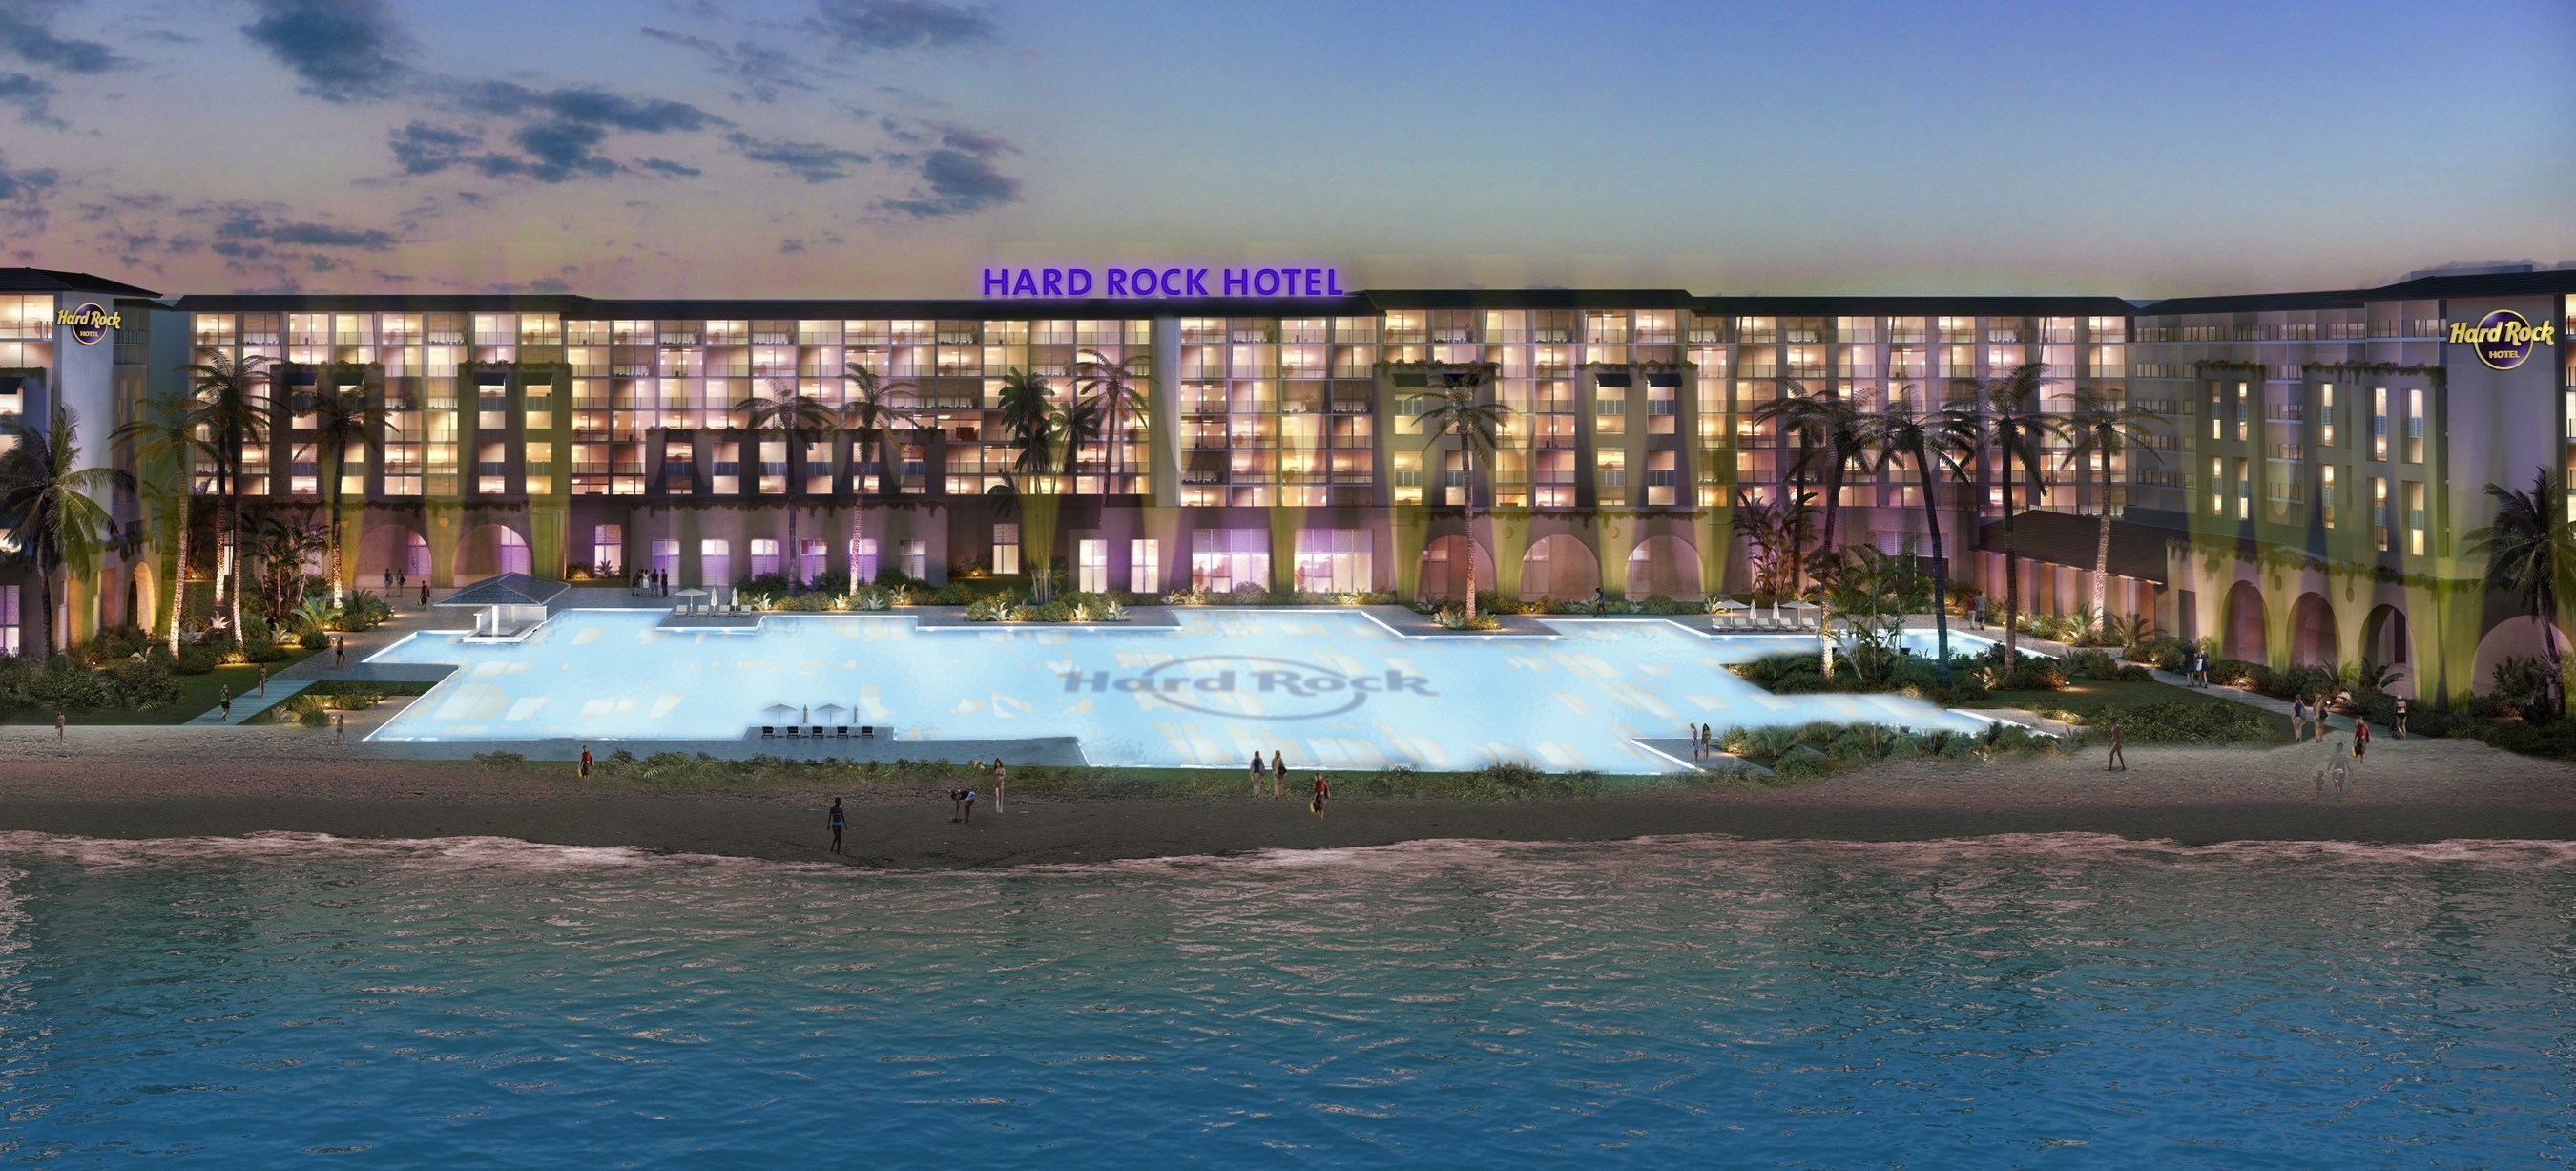 Hard Rock Hotel Riviera Cancun, Set to Open in Late-2017